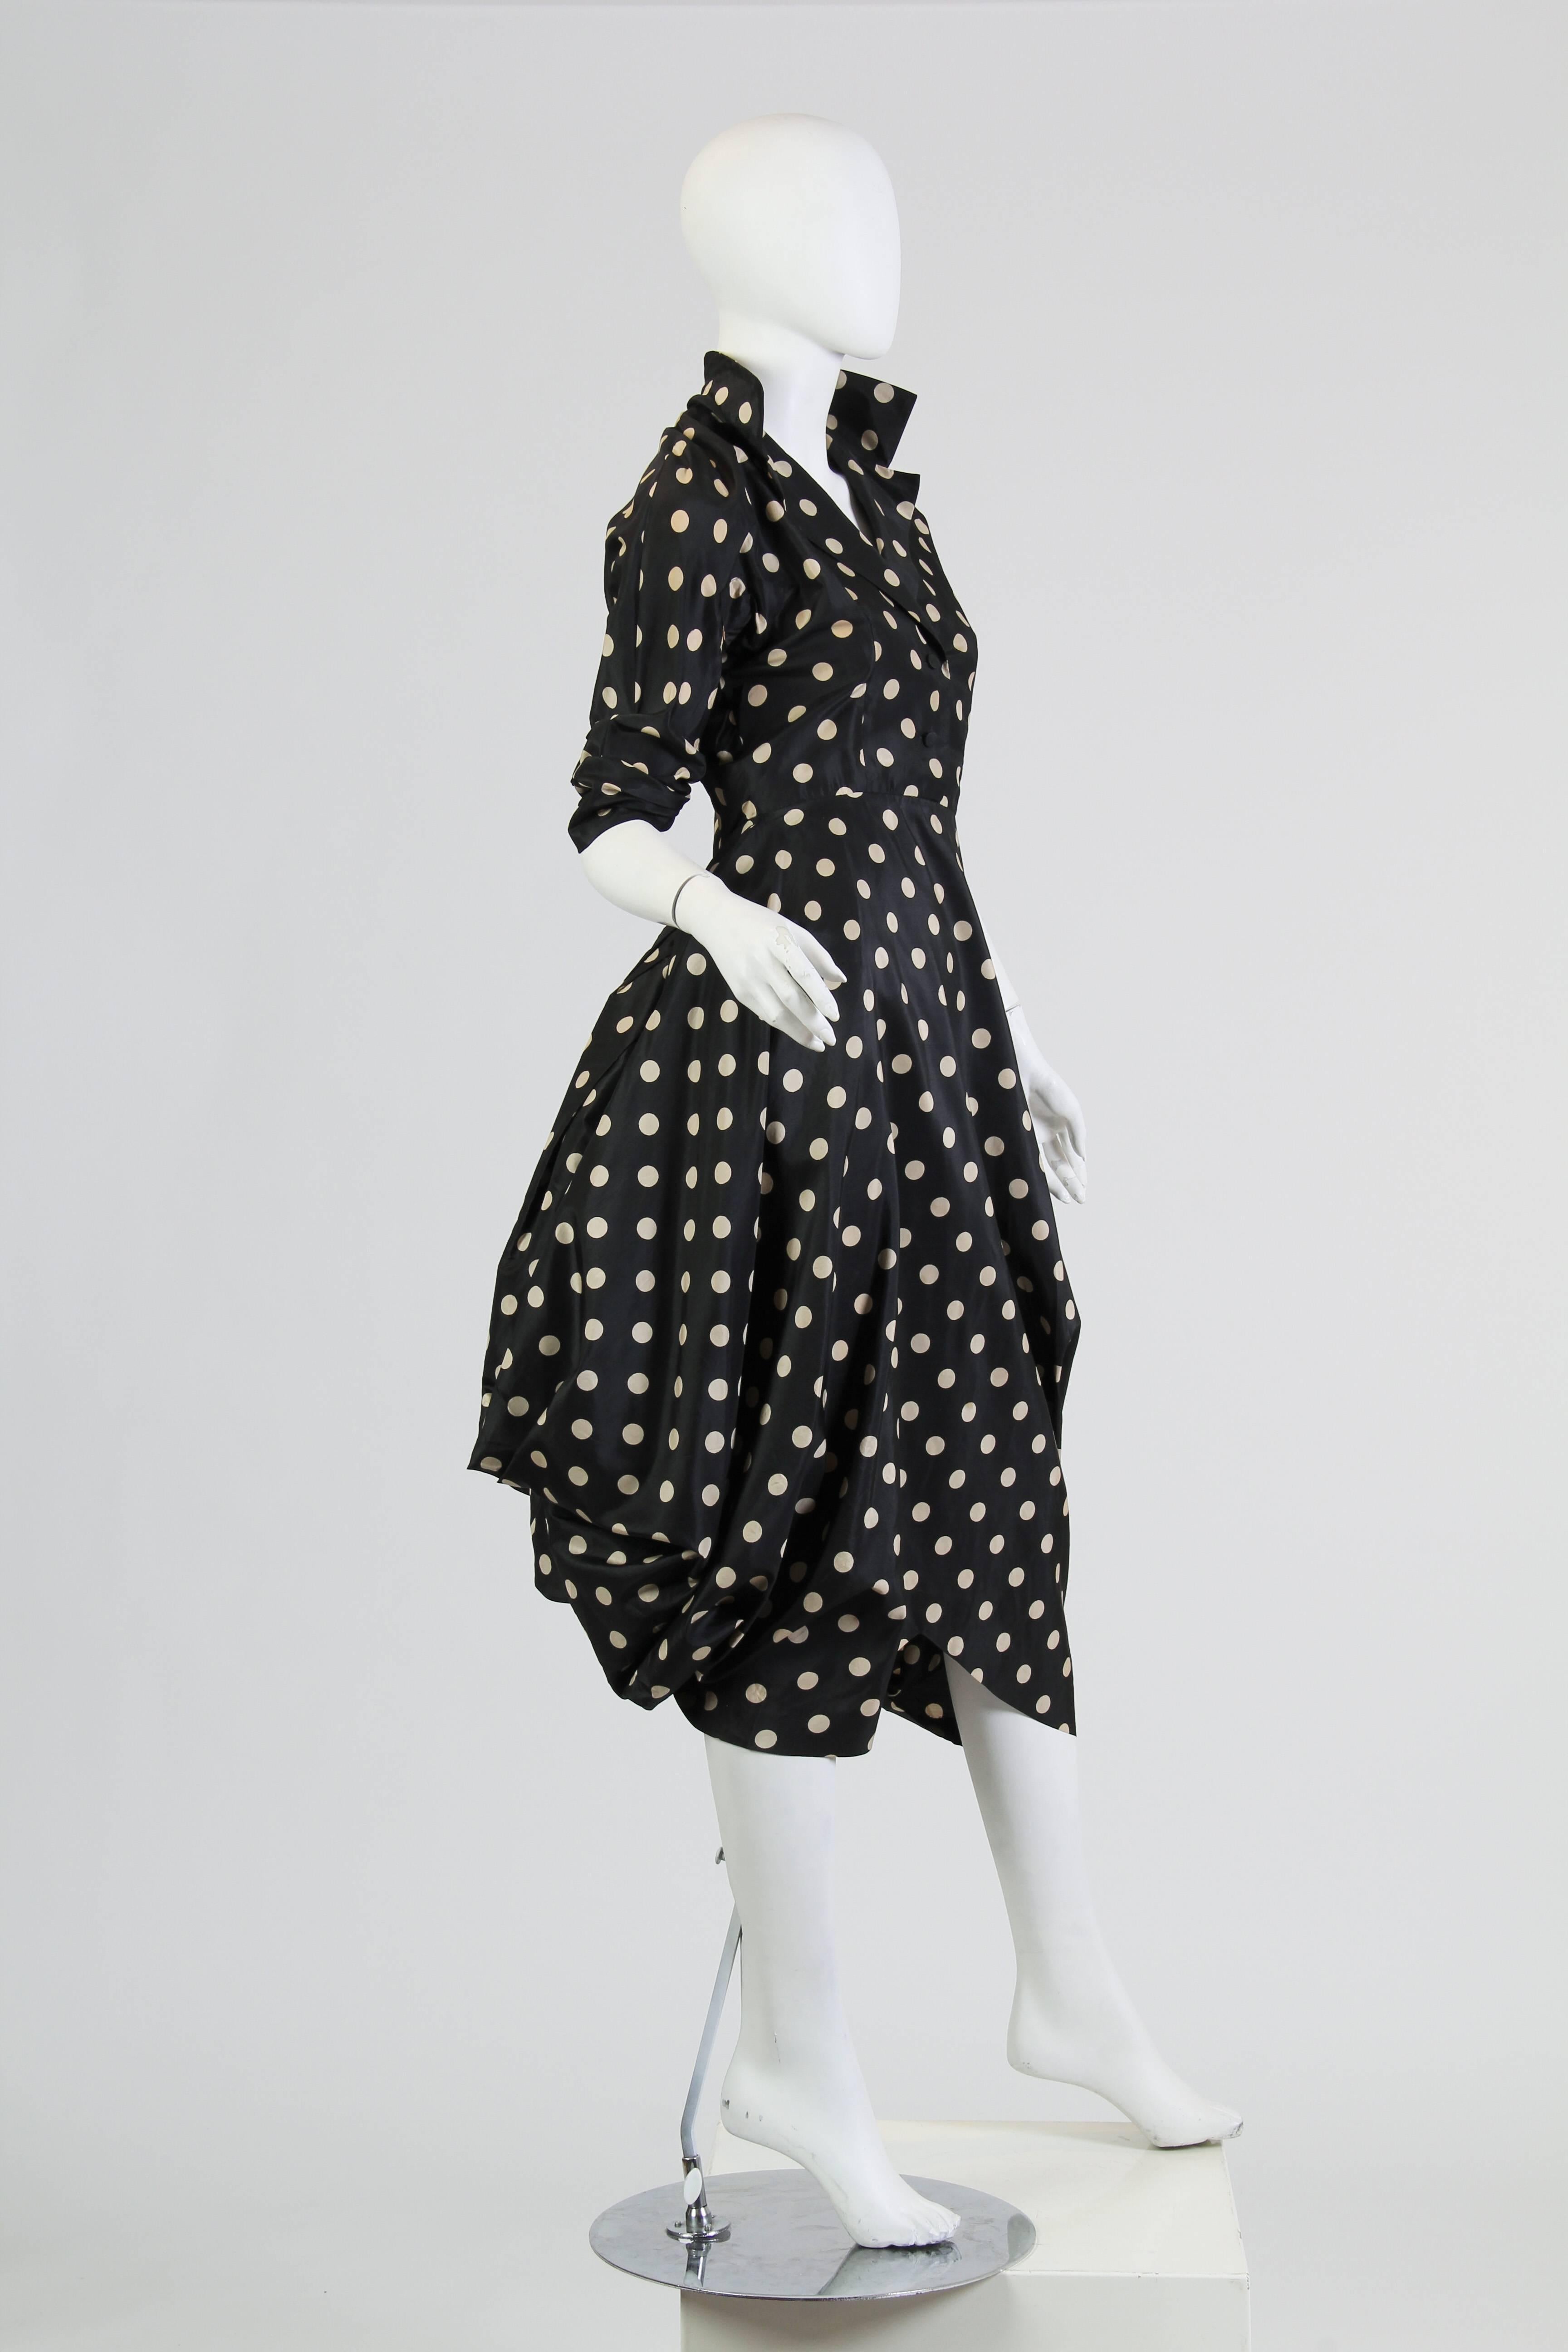 This dress is Very well made and finely detailed from richly bodies silk. This is an avant-garde reinvention of the classic 'Little Black Dress.' Its bottom layer, revealed at the bust and neckline, is a smooth black fabric with large tonal polka